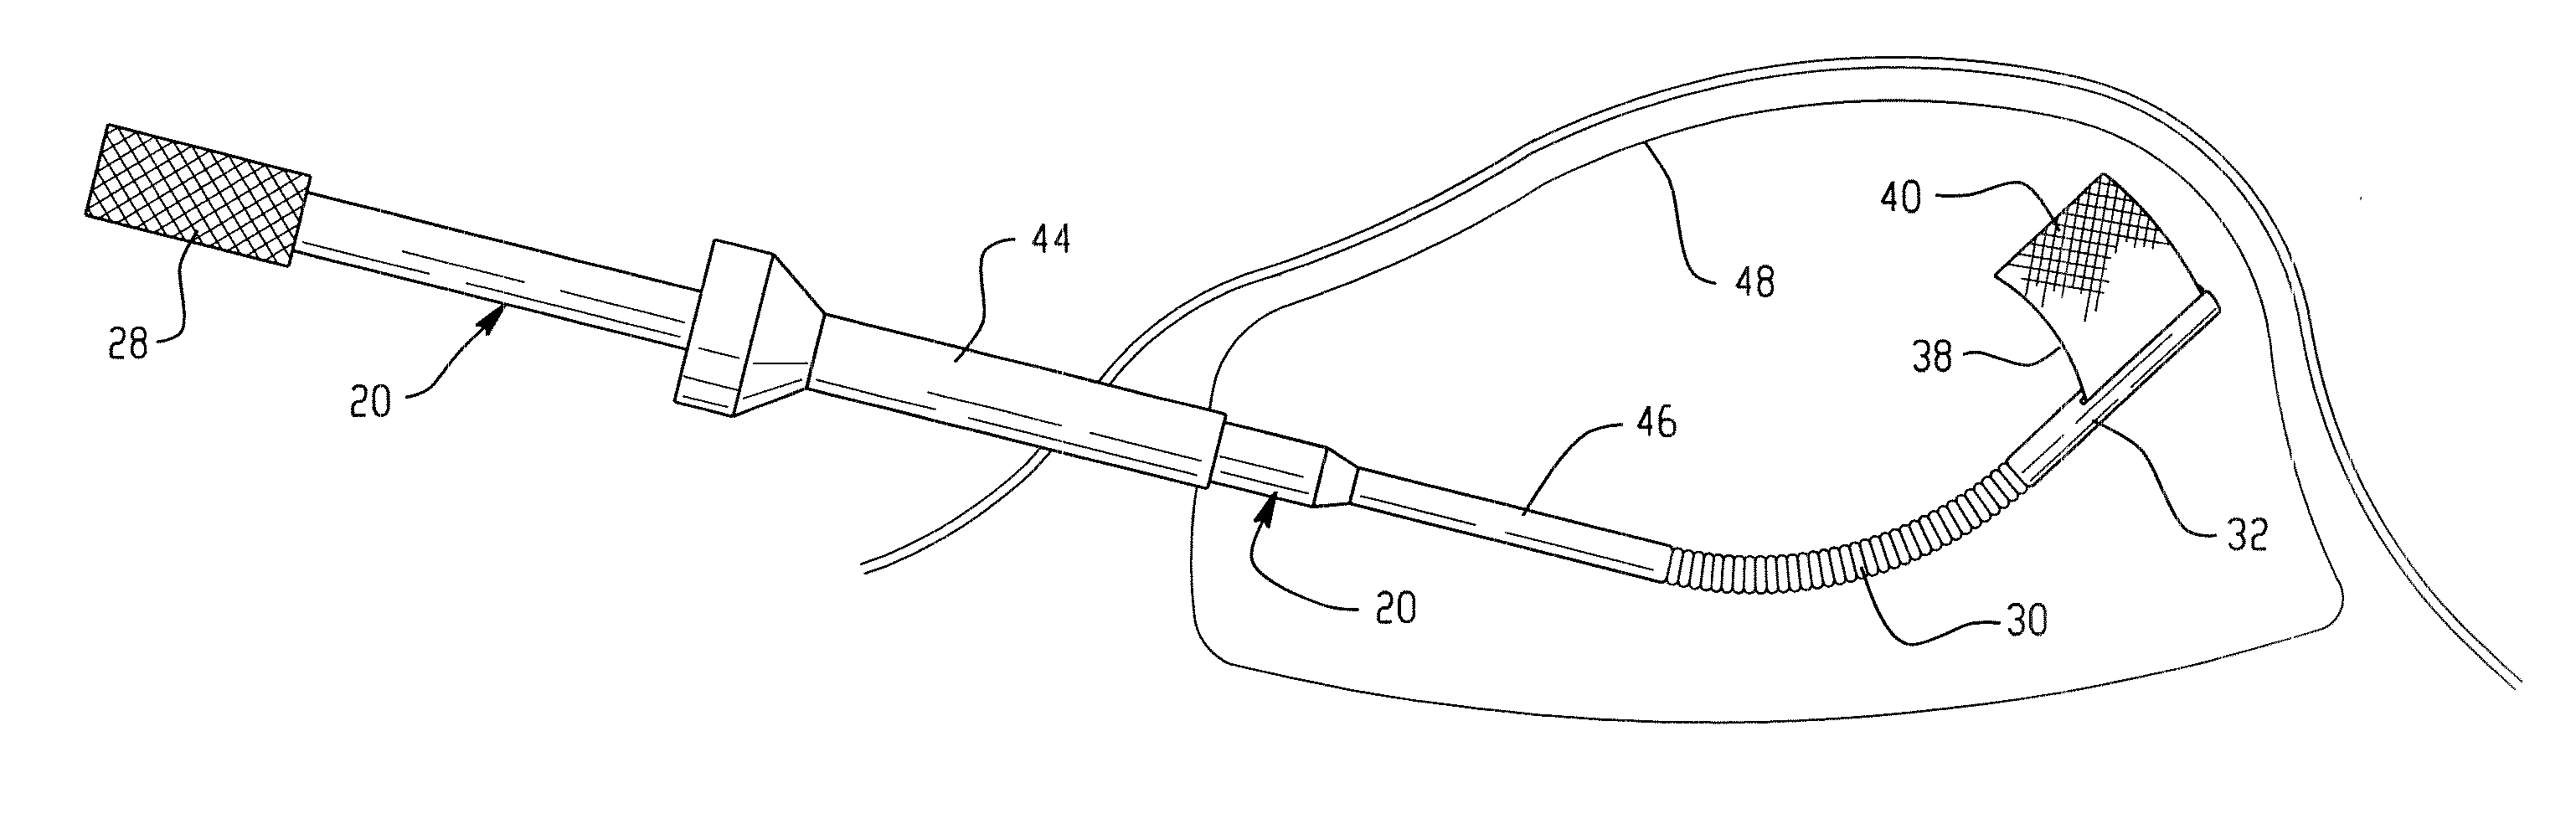 Surgical repair systems and methods of using the same